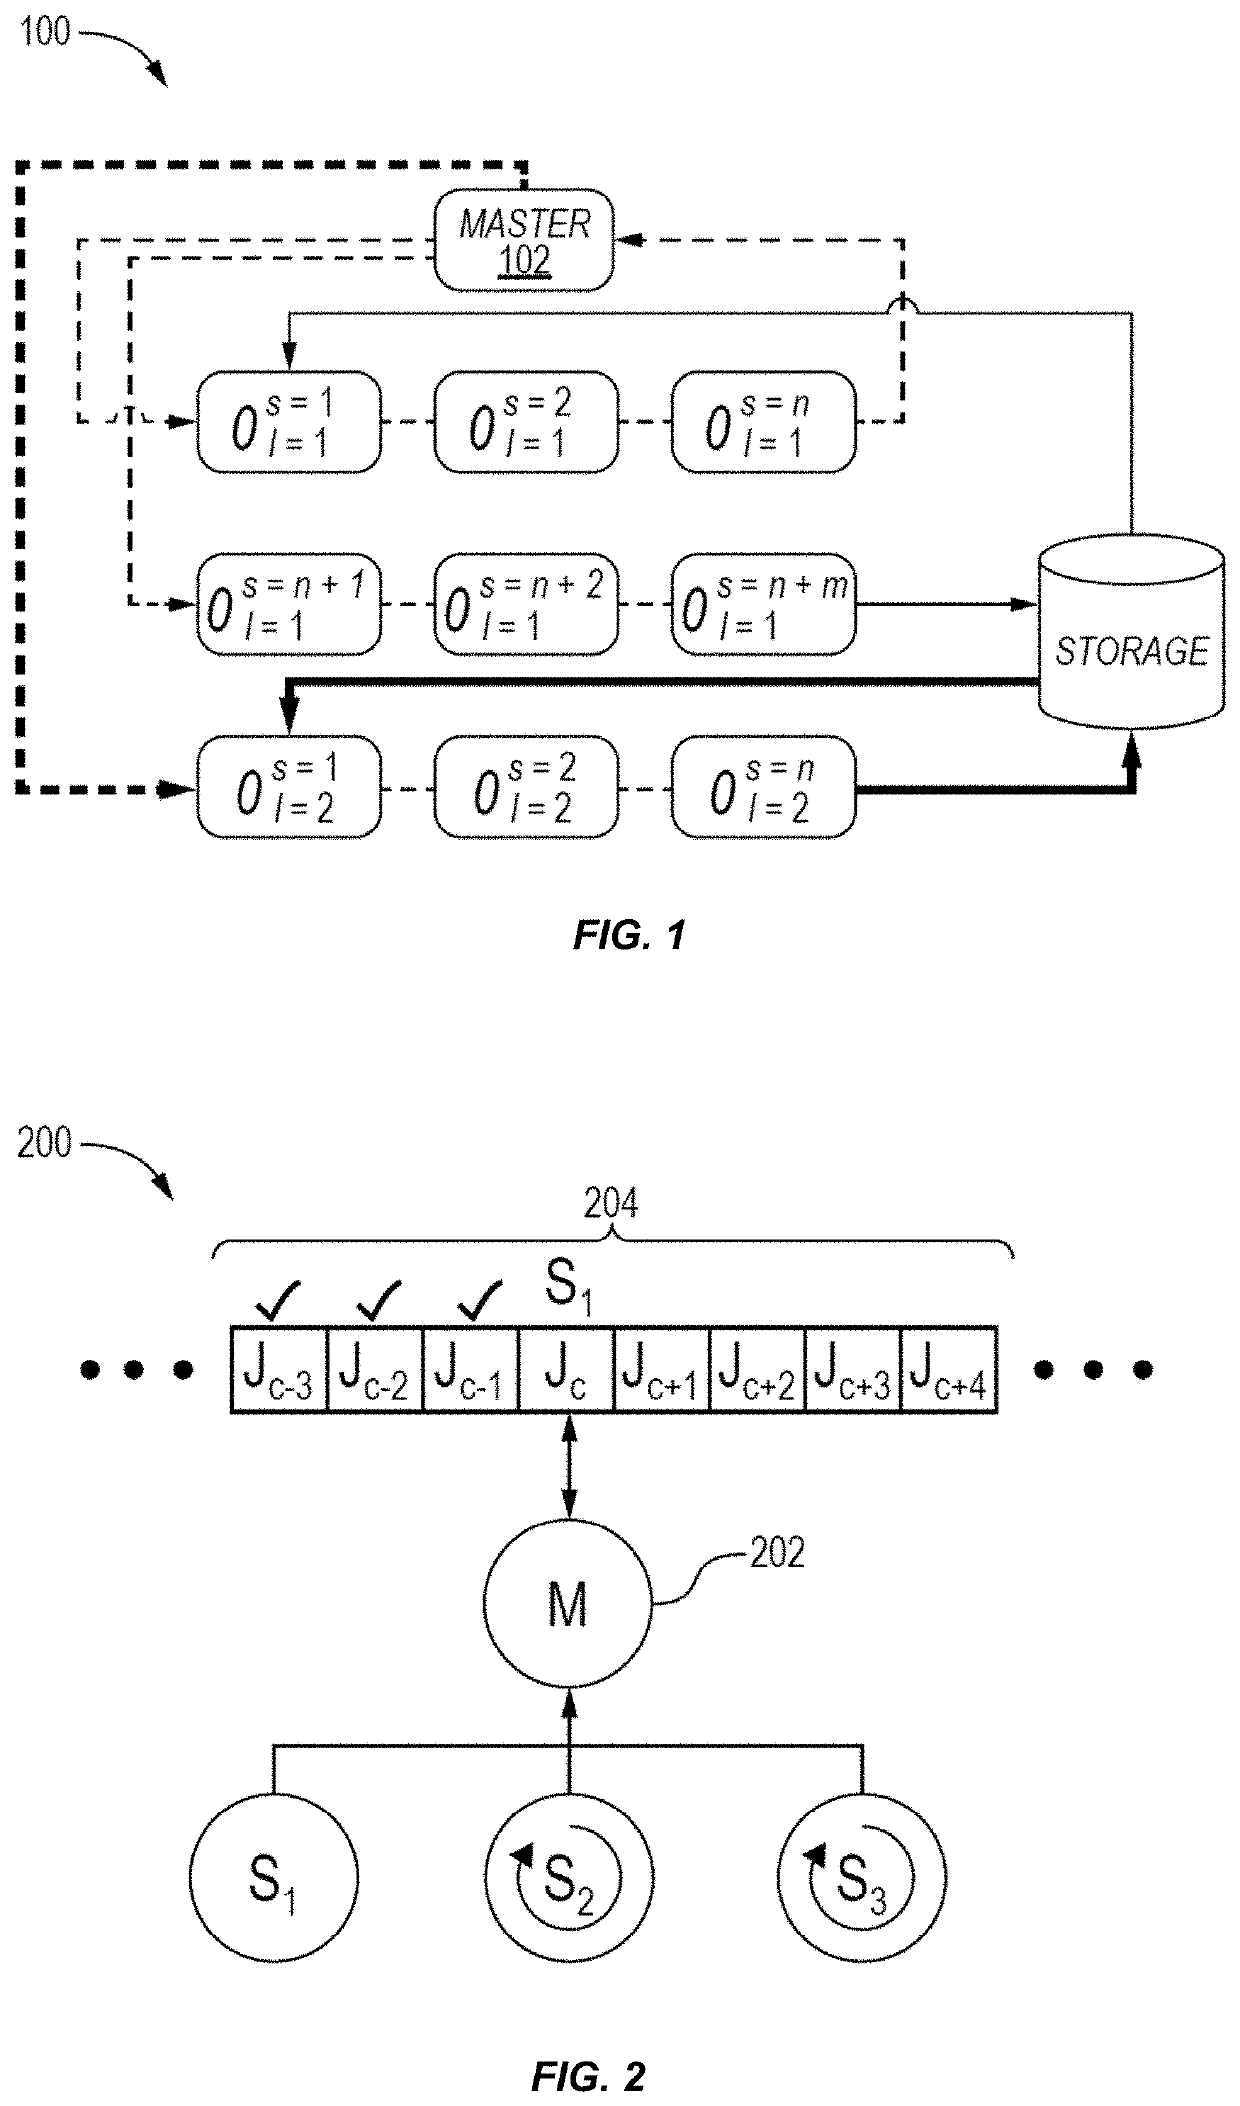 Systems and methods for content-based indexing of videos at web-scale